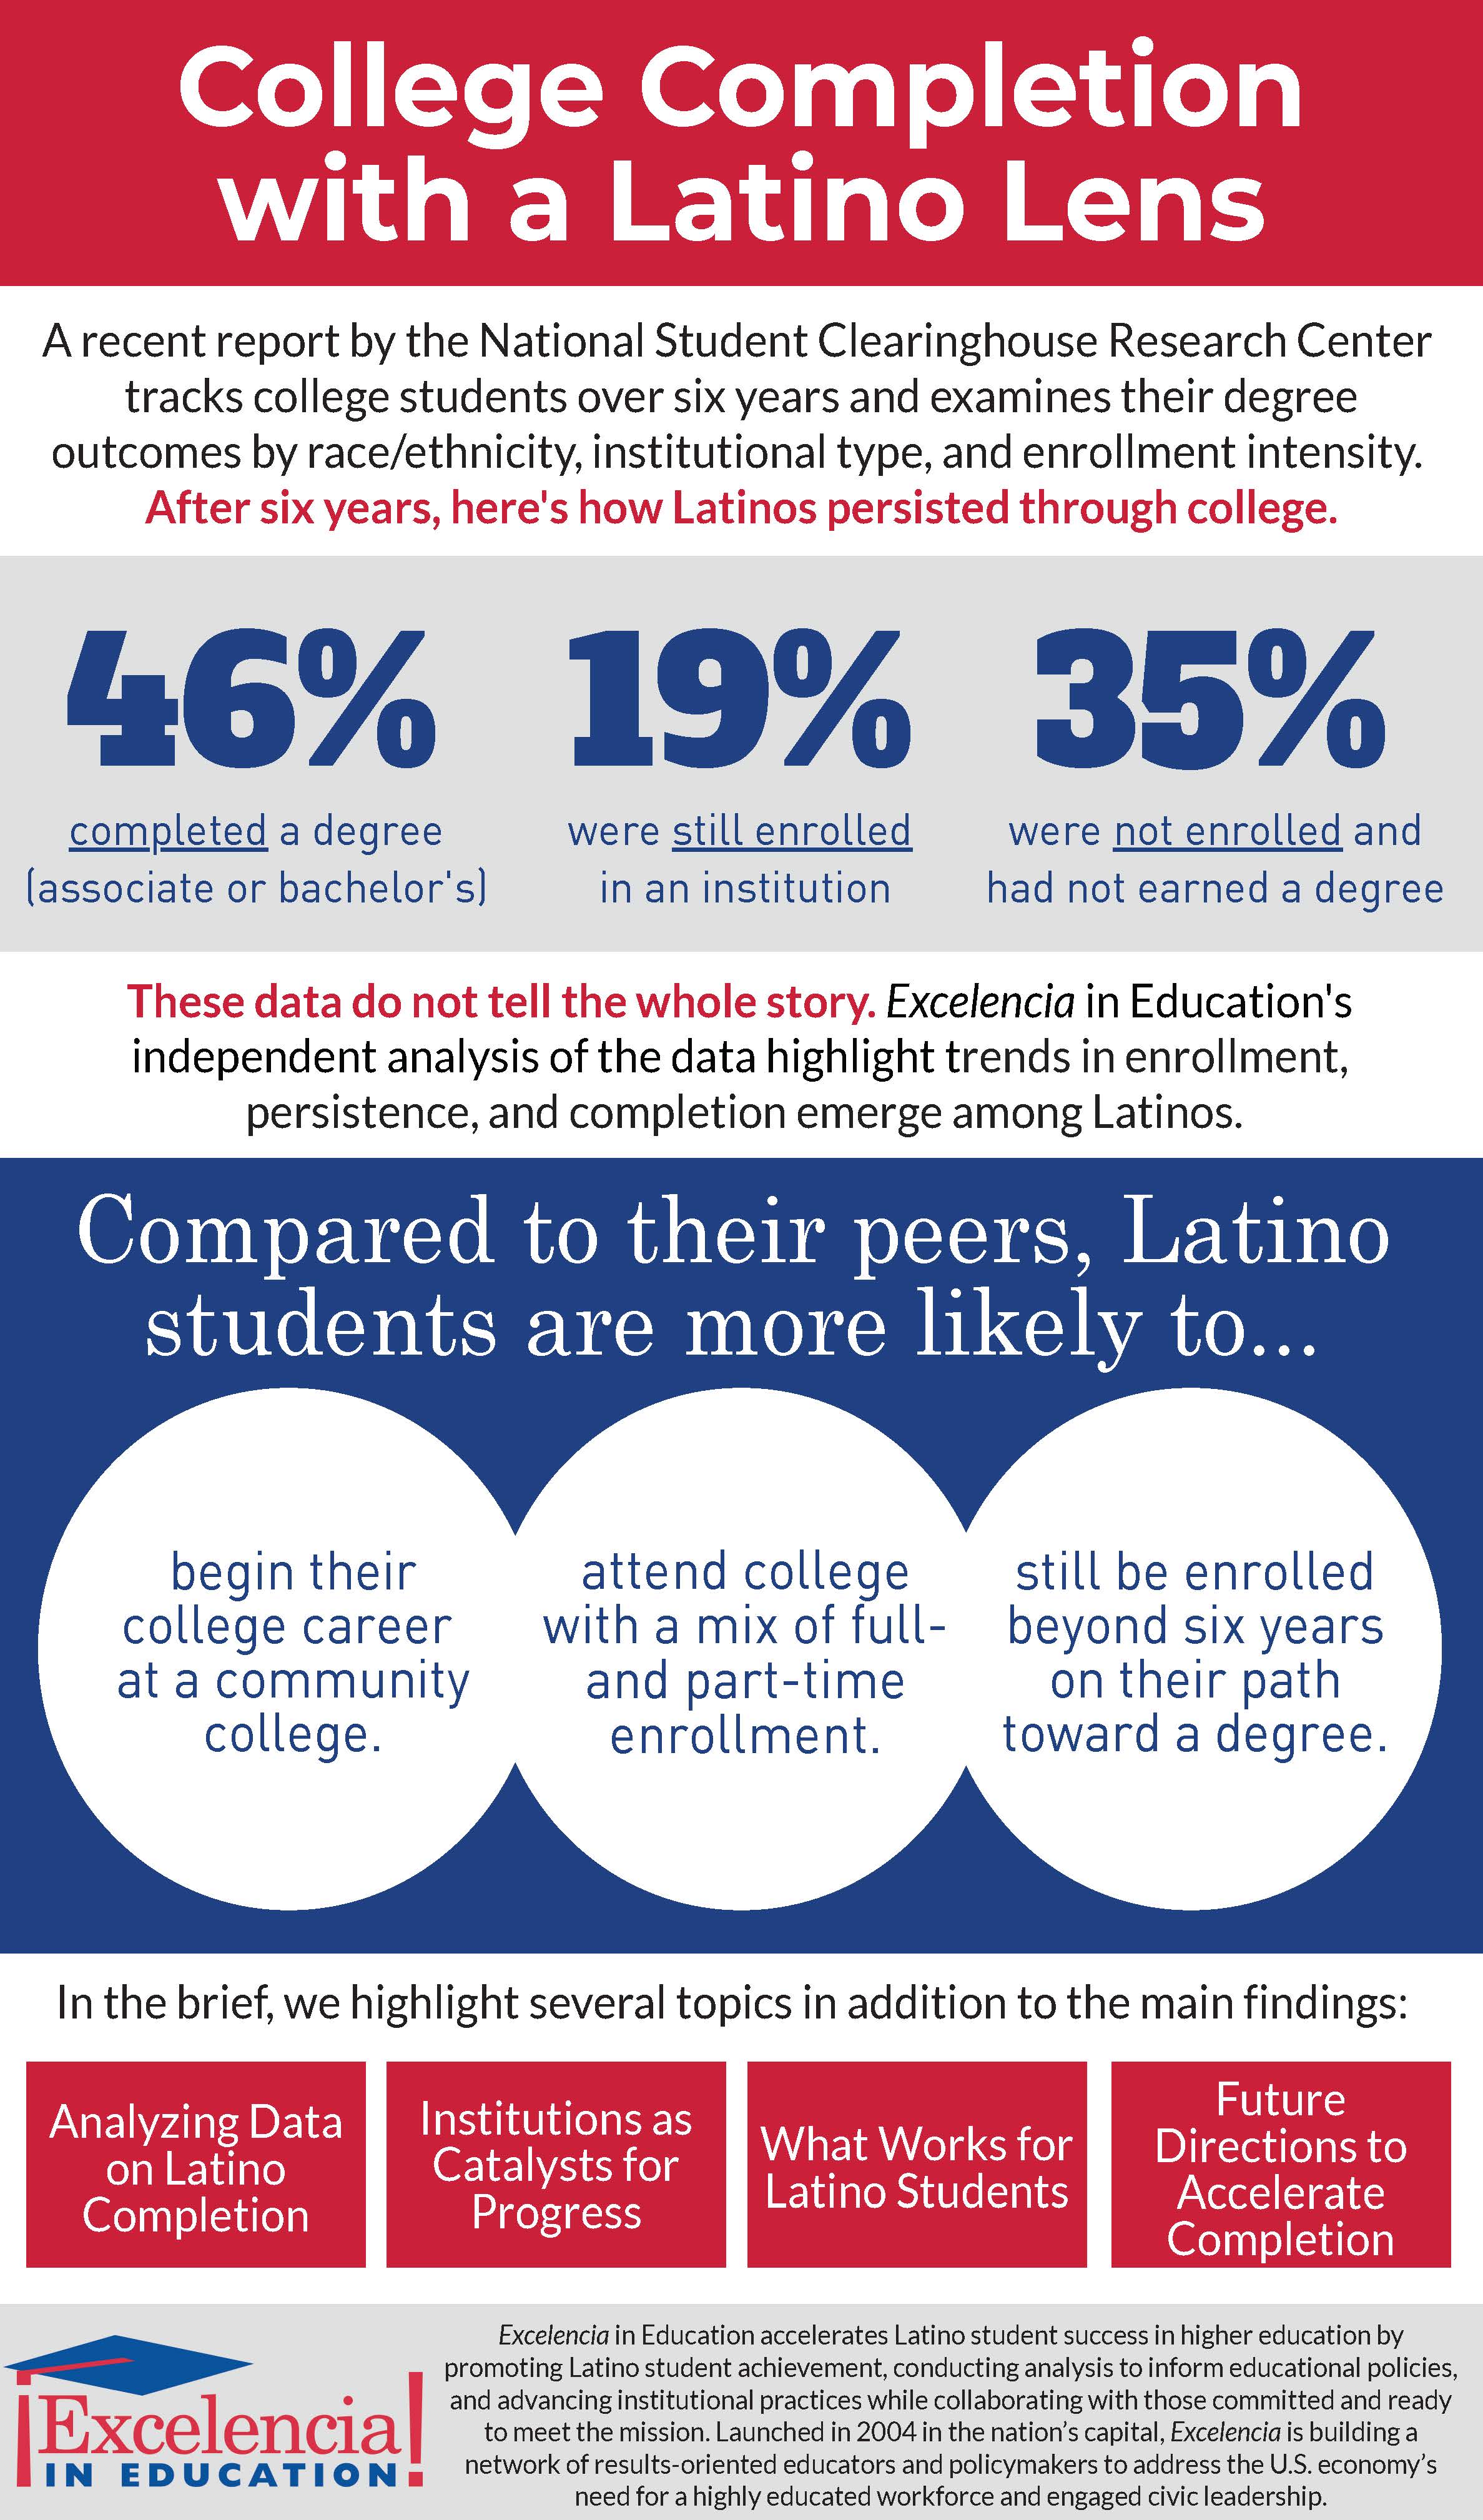 Infographic - College Completion Through a Latino Lens (JPG)